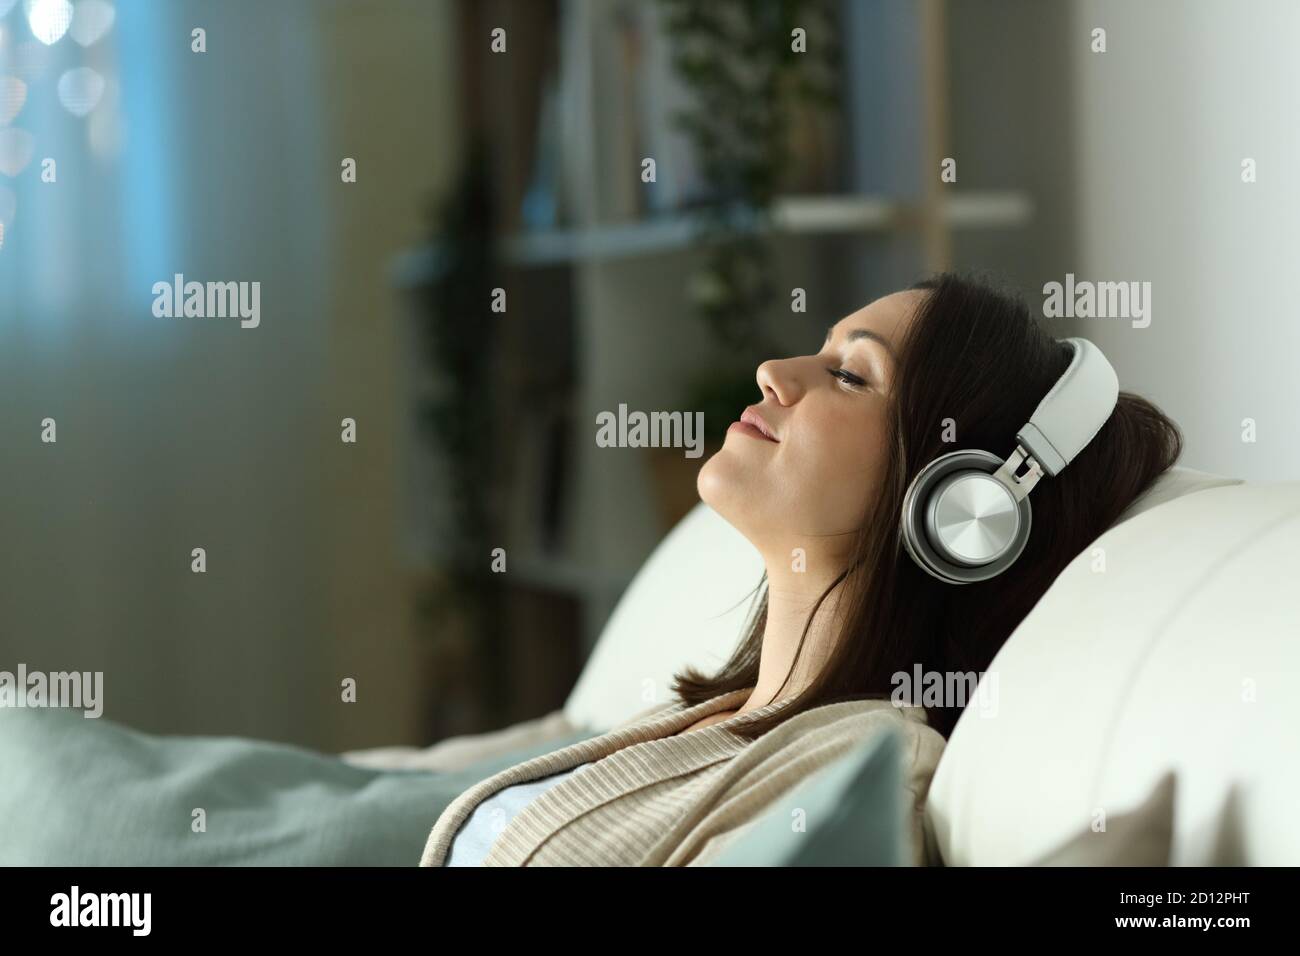 Profile of a relaxed woman listening to music with headphones in the night sitting on a couch in the living room at home Stock Photo